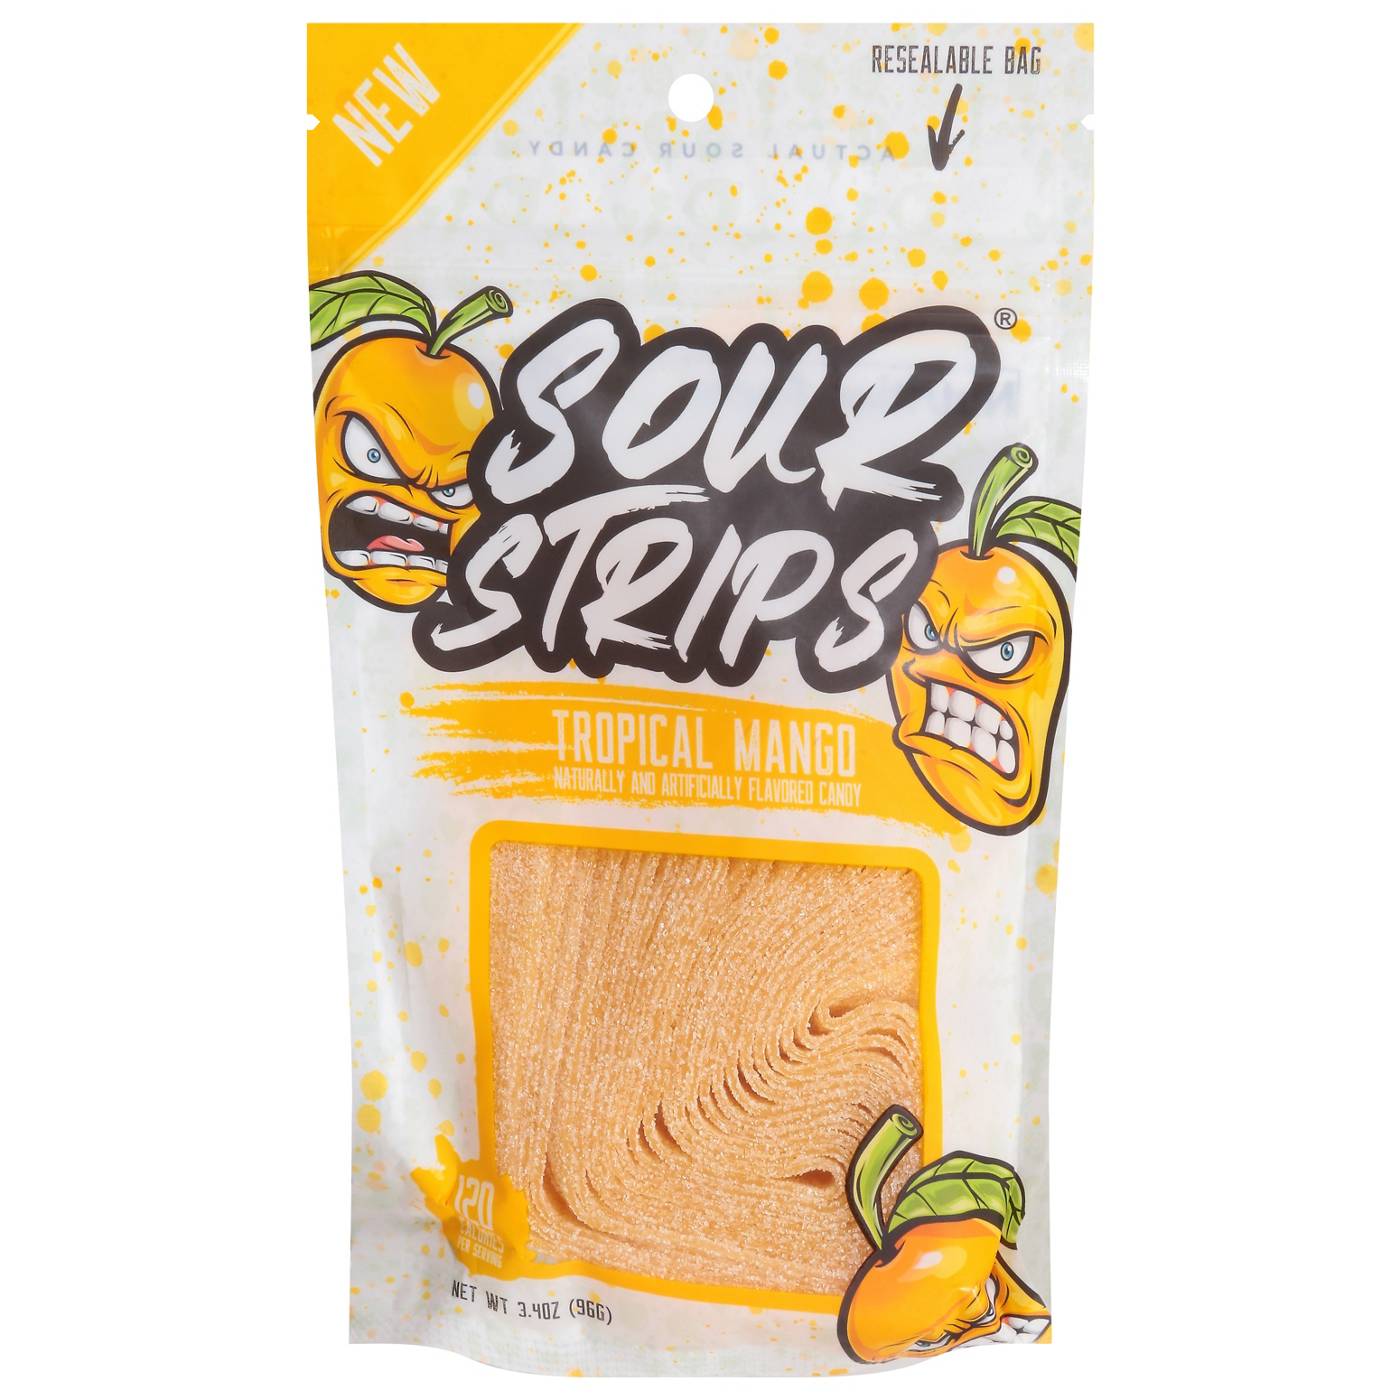 Sour Strips Tropical Mango Candy; image 1 of 2